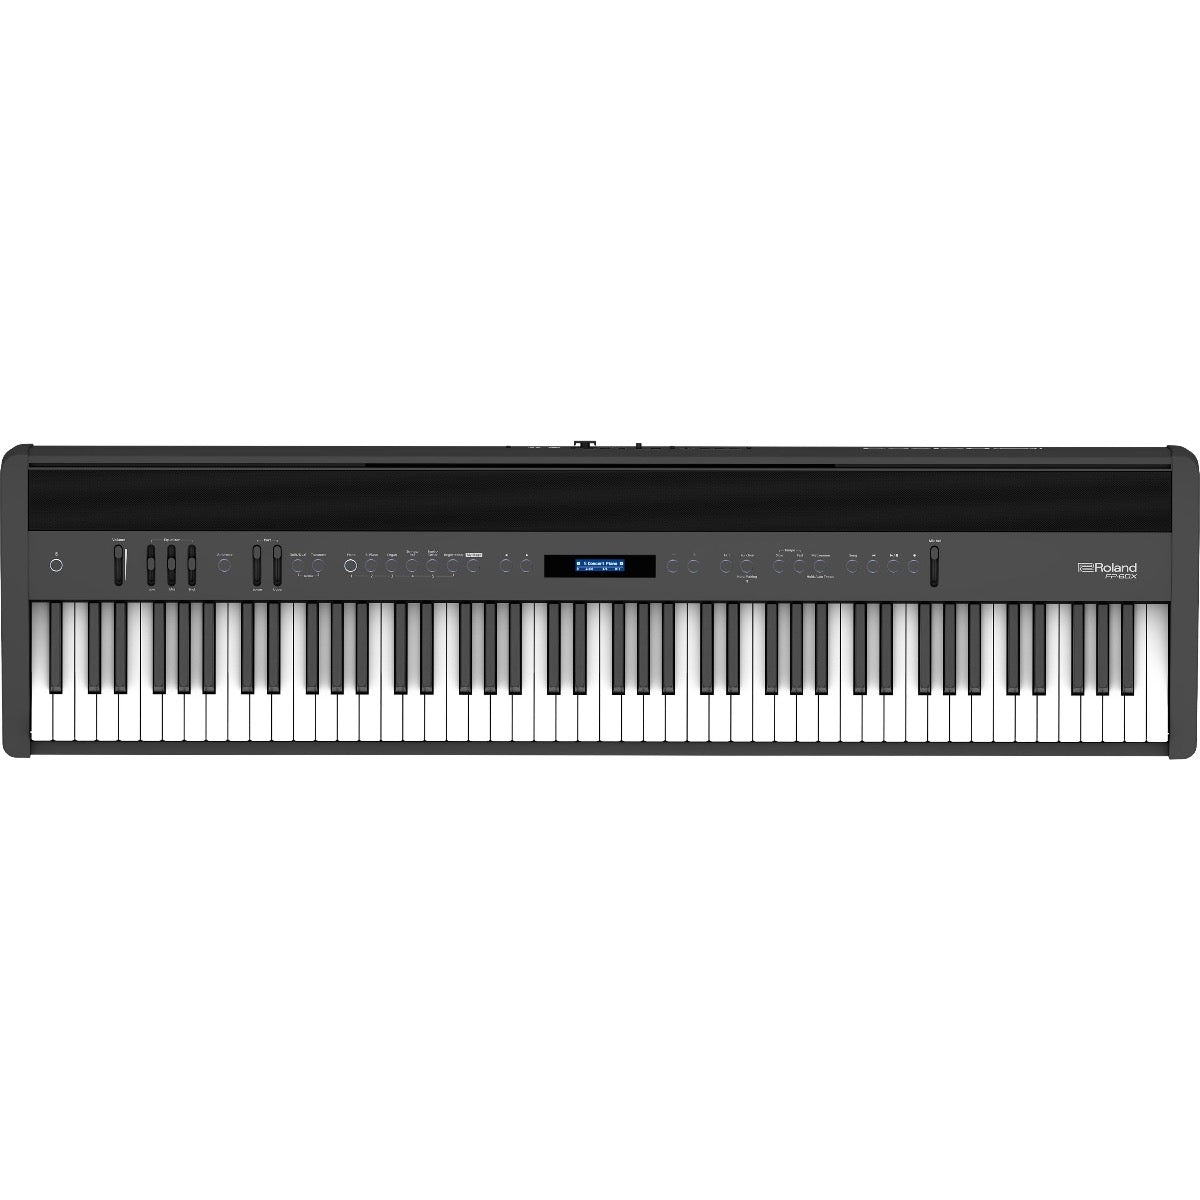 Top view of Roland FP-60X Digital Piano - Black